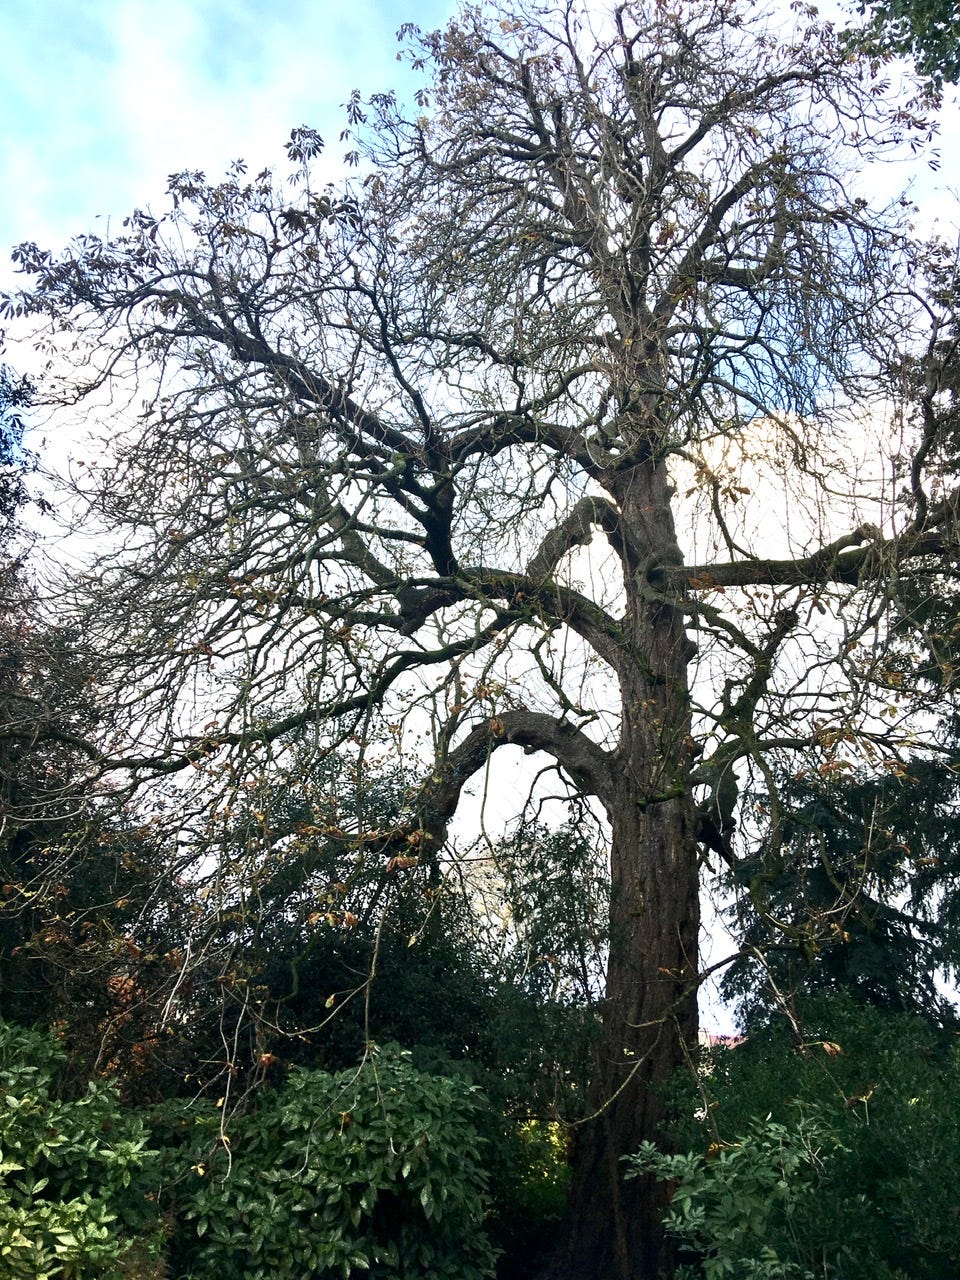 Horse Chestnut Tree at the old Bandstand at Sydney Gardens